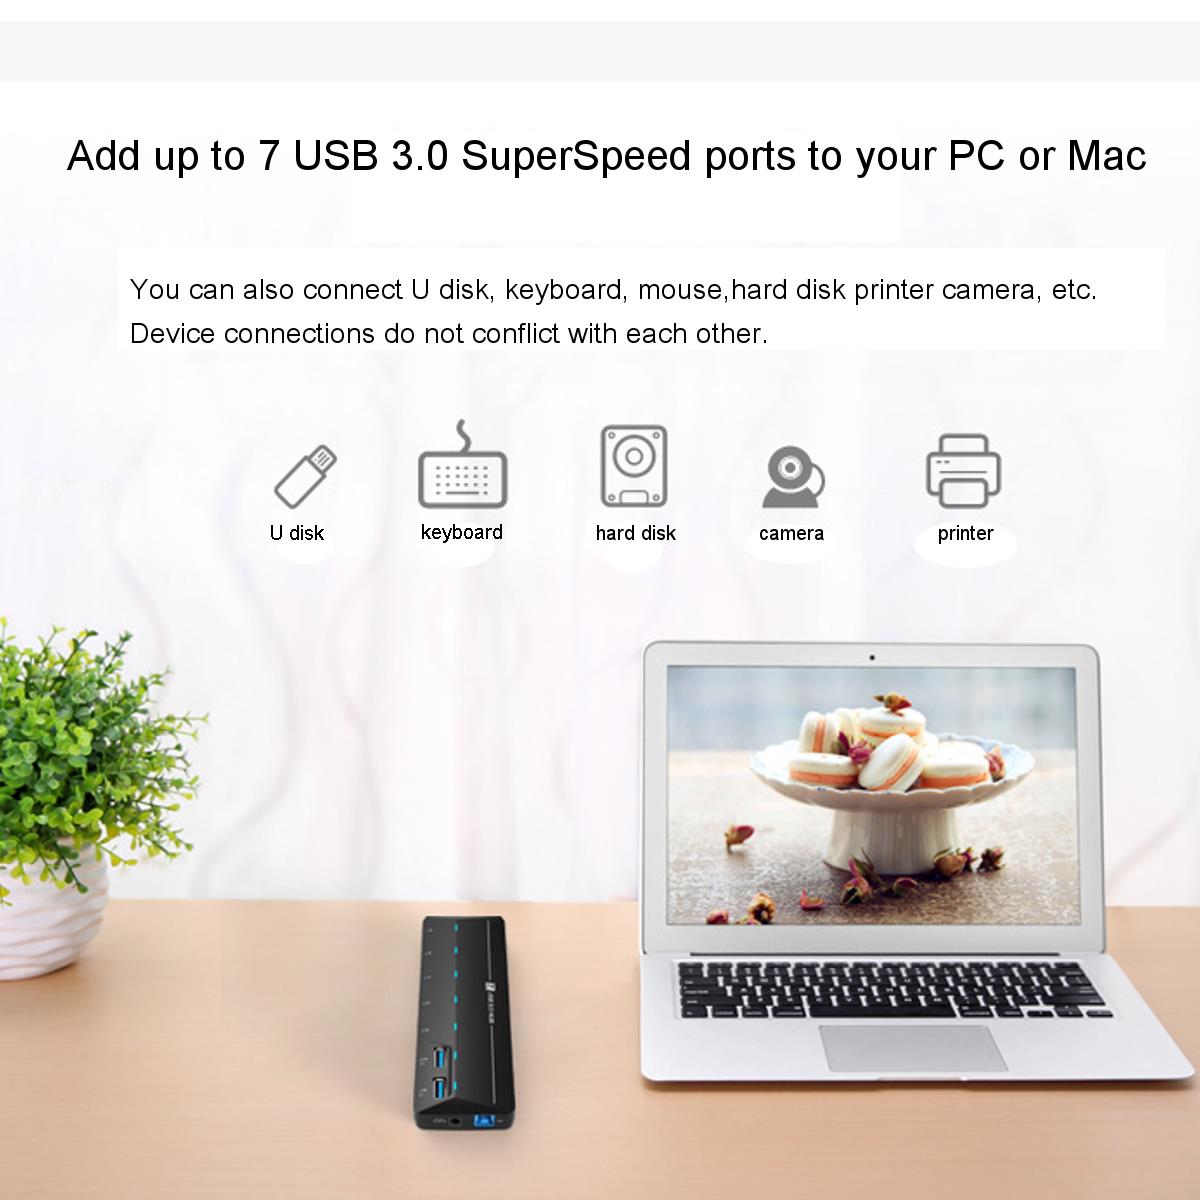 High Speed USB 3.0 7 Ports Hub with 1.5A Quick Charge Port 9